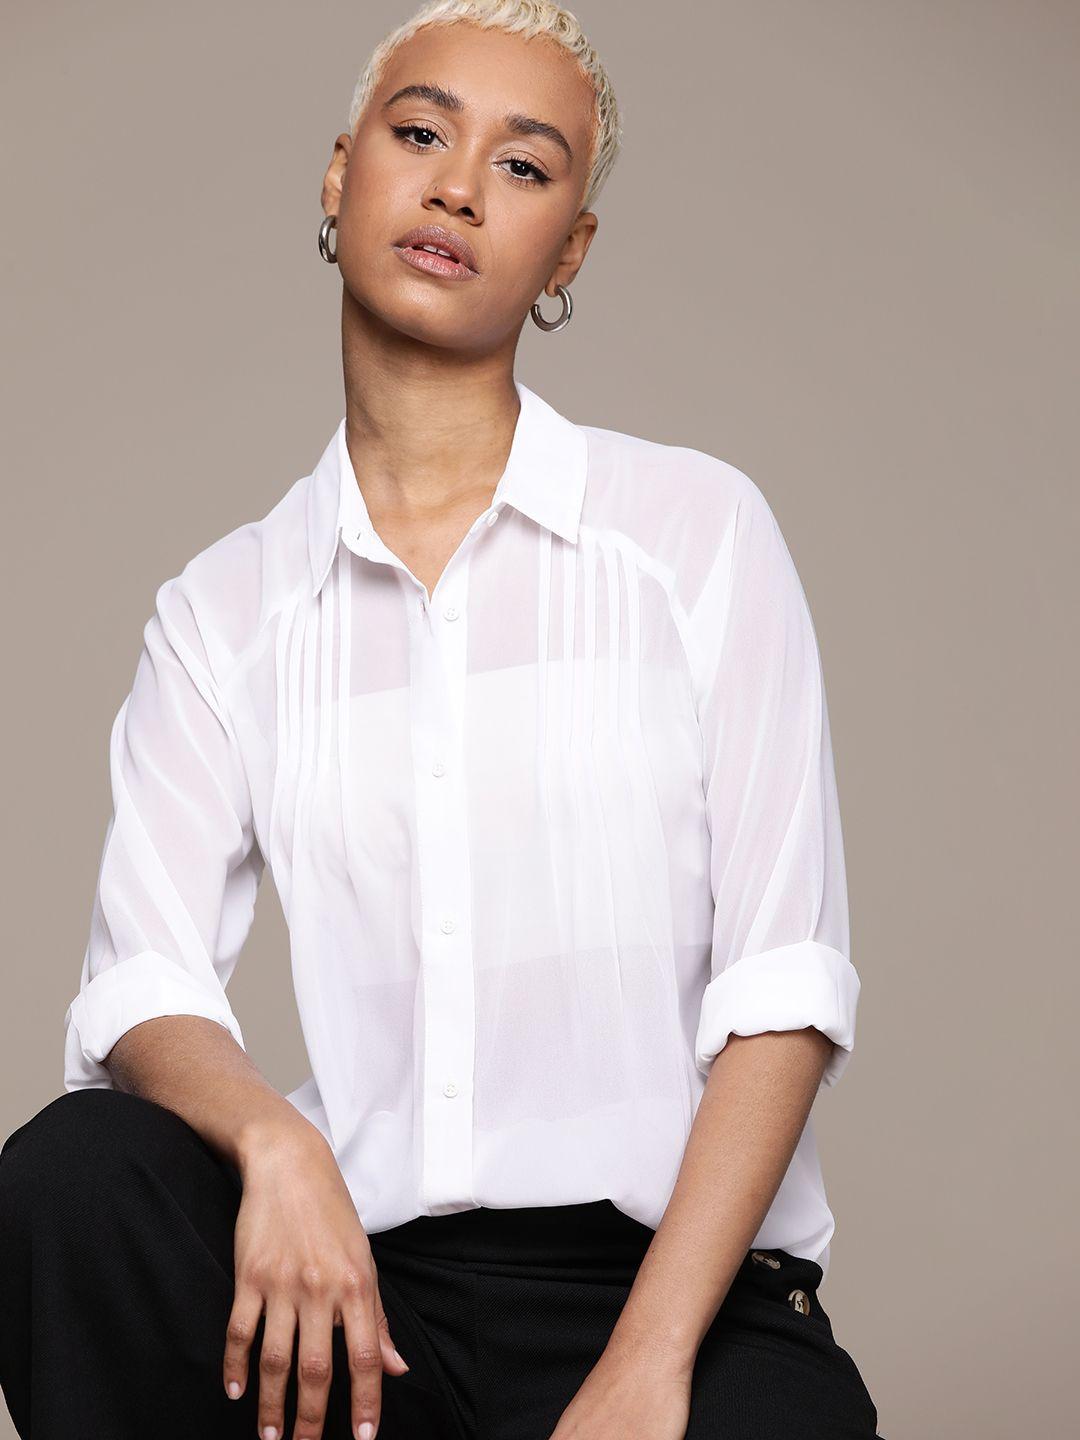 the roadster lifestyle co. sheer spread collar pleated detail shirt